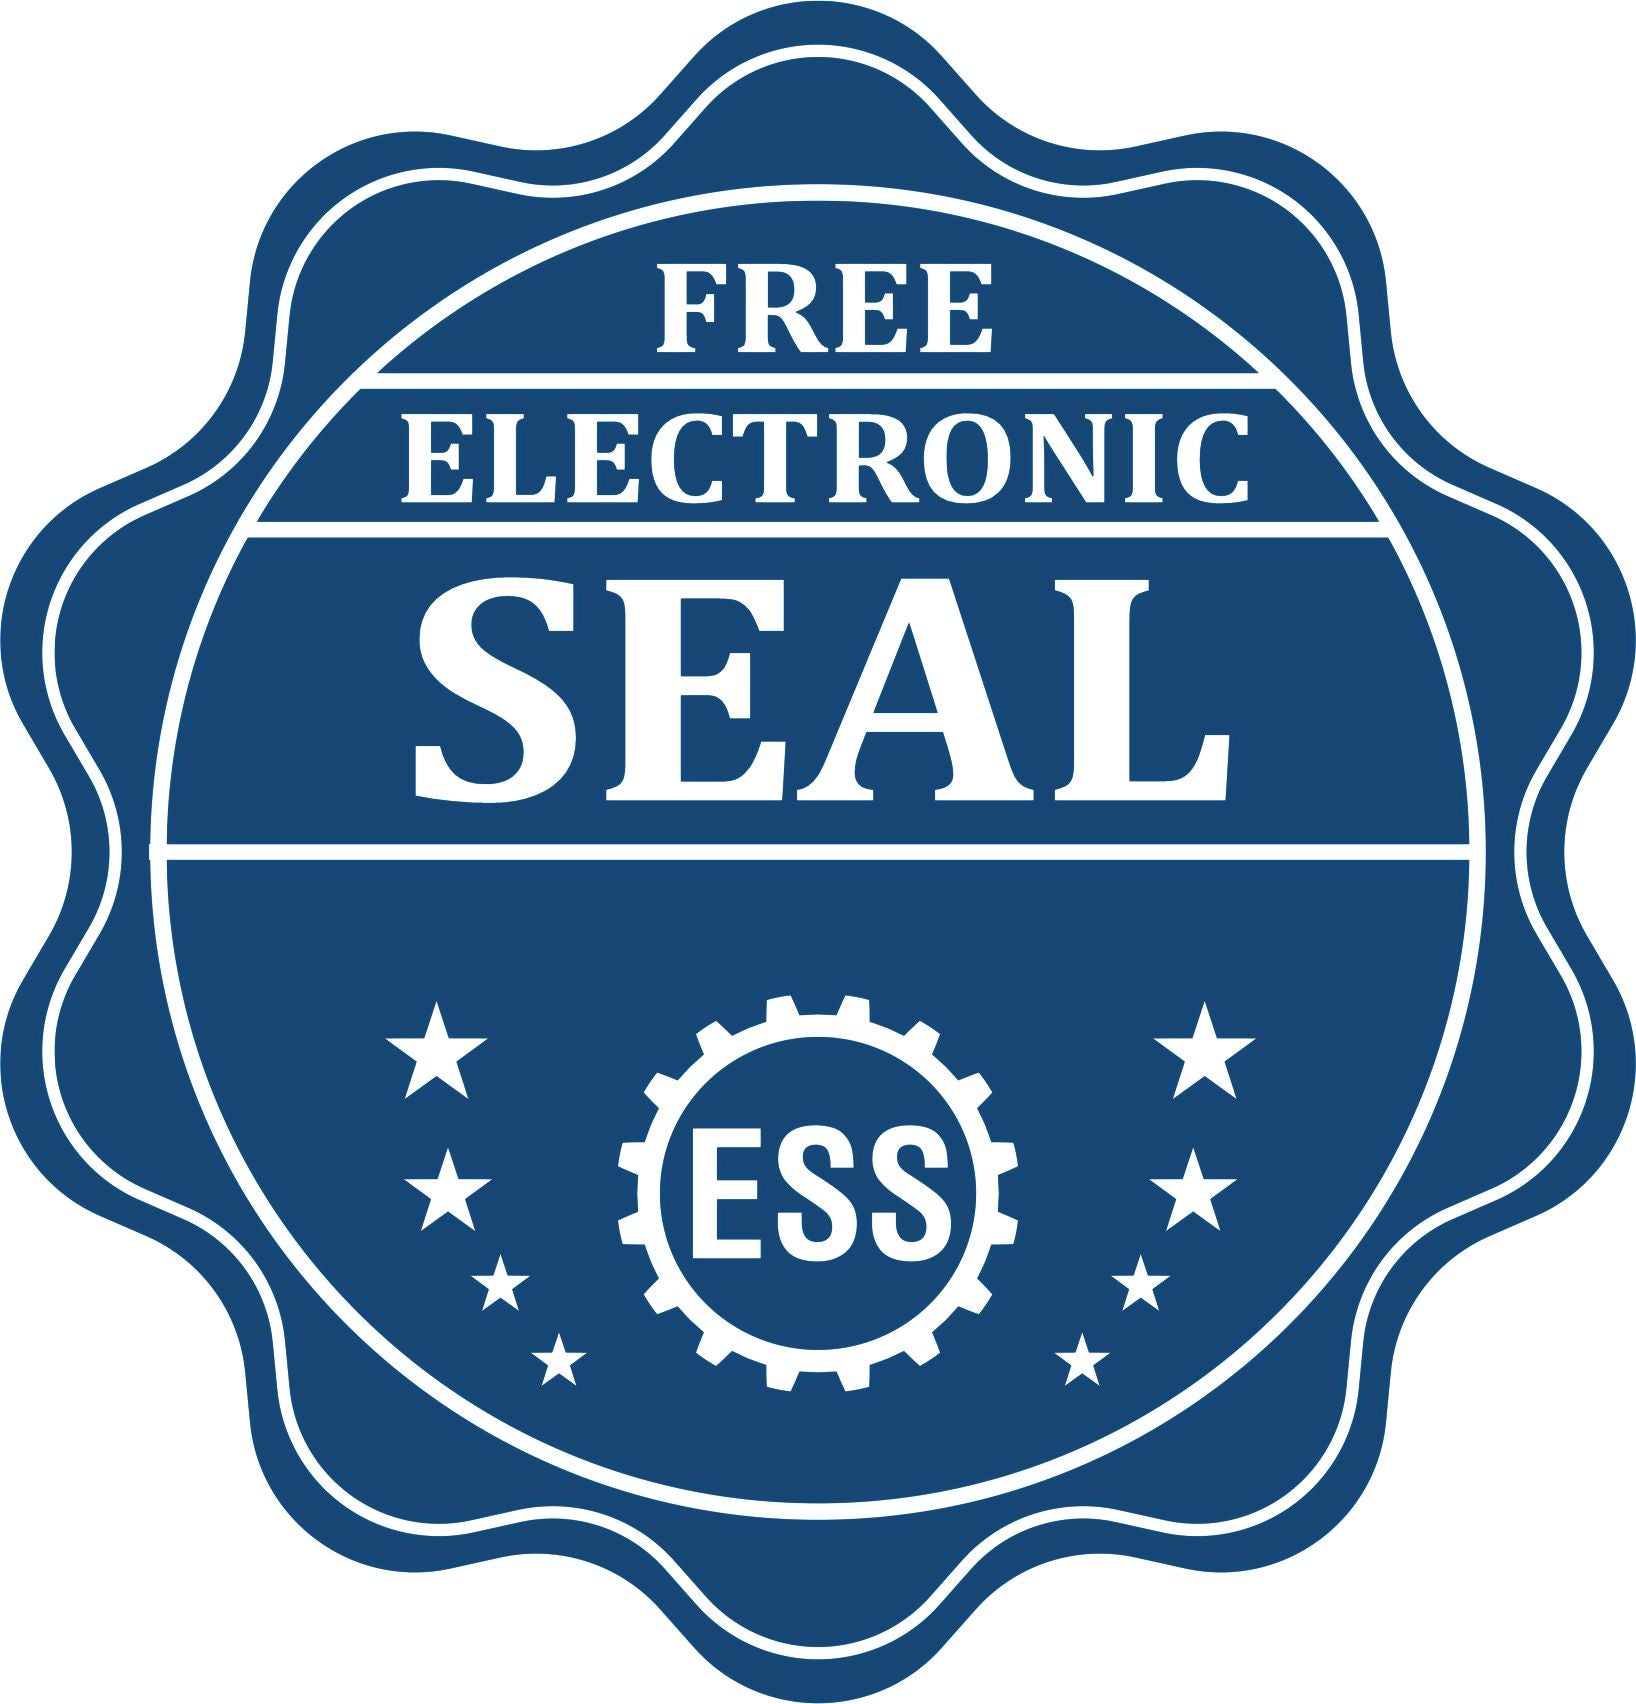 A badge showing a free electronic seal for the State of South Dakota Extended Long Reach Engineer Seal with stars and the ESS gear on the emblem.